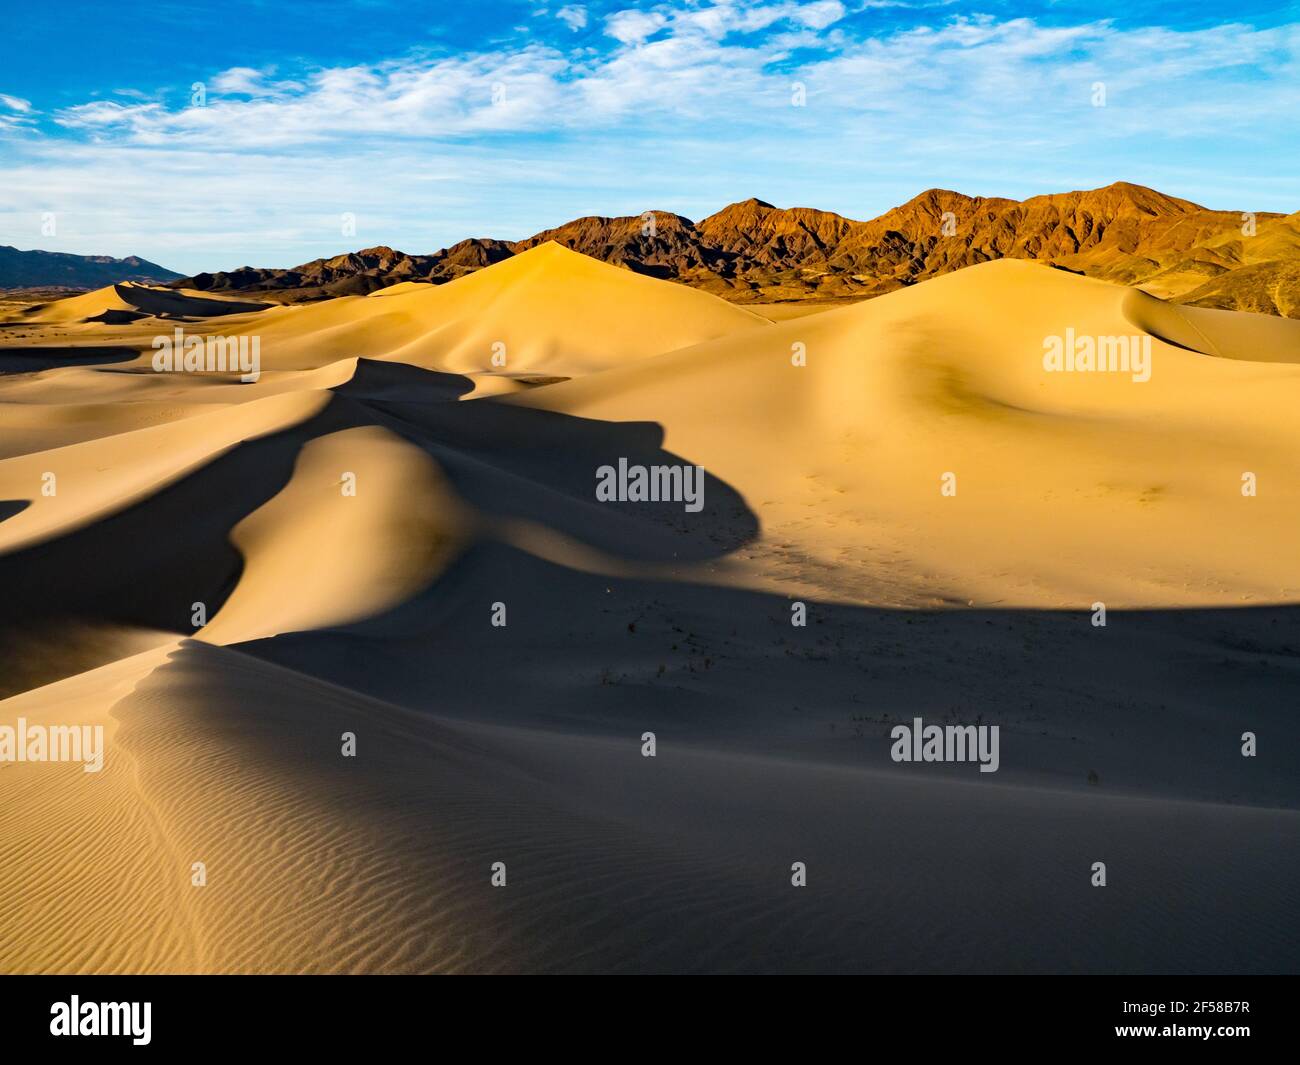 The Ibex dunes in remote Death Valley National Park, California, USA Stock Photo